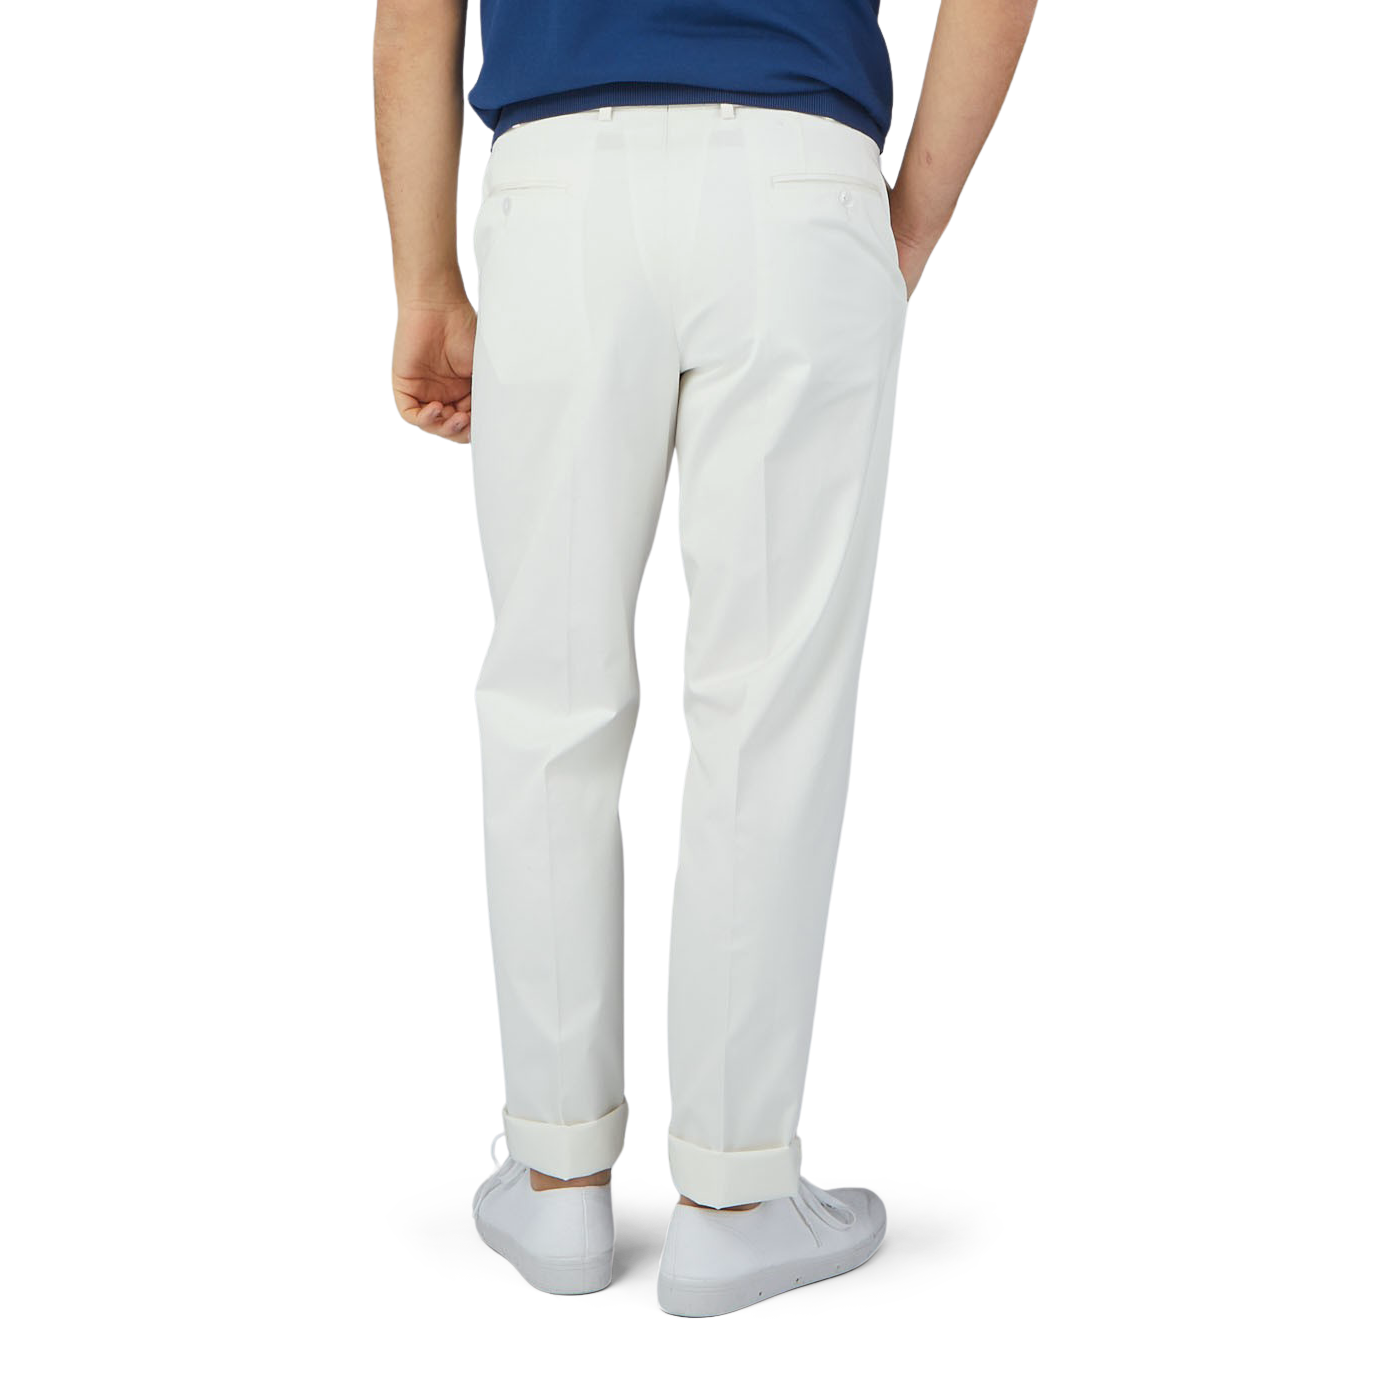 The man is wearing Luigi Bianchi Off-White Cotton Twill Flat Front Trousers and a blue cotton twill shirt.